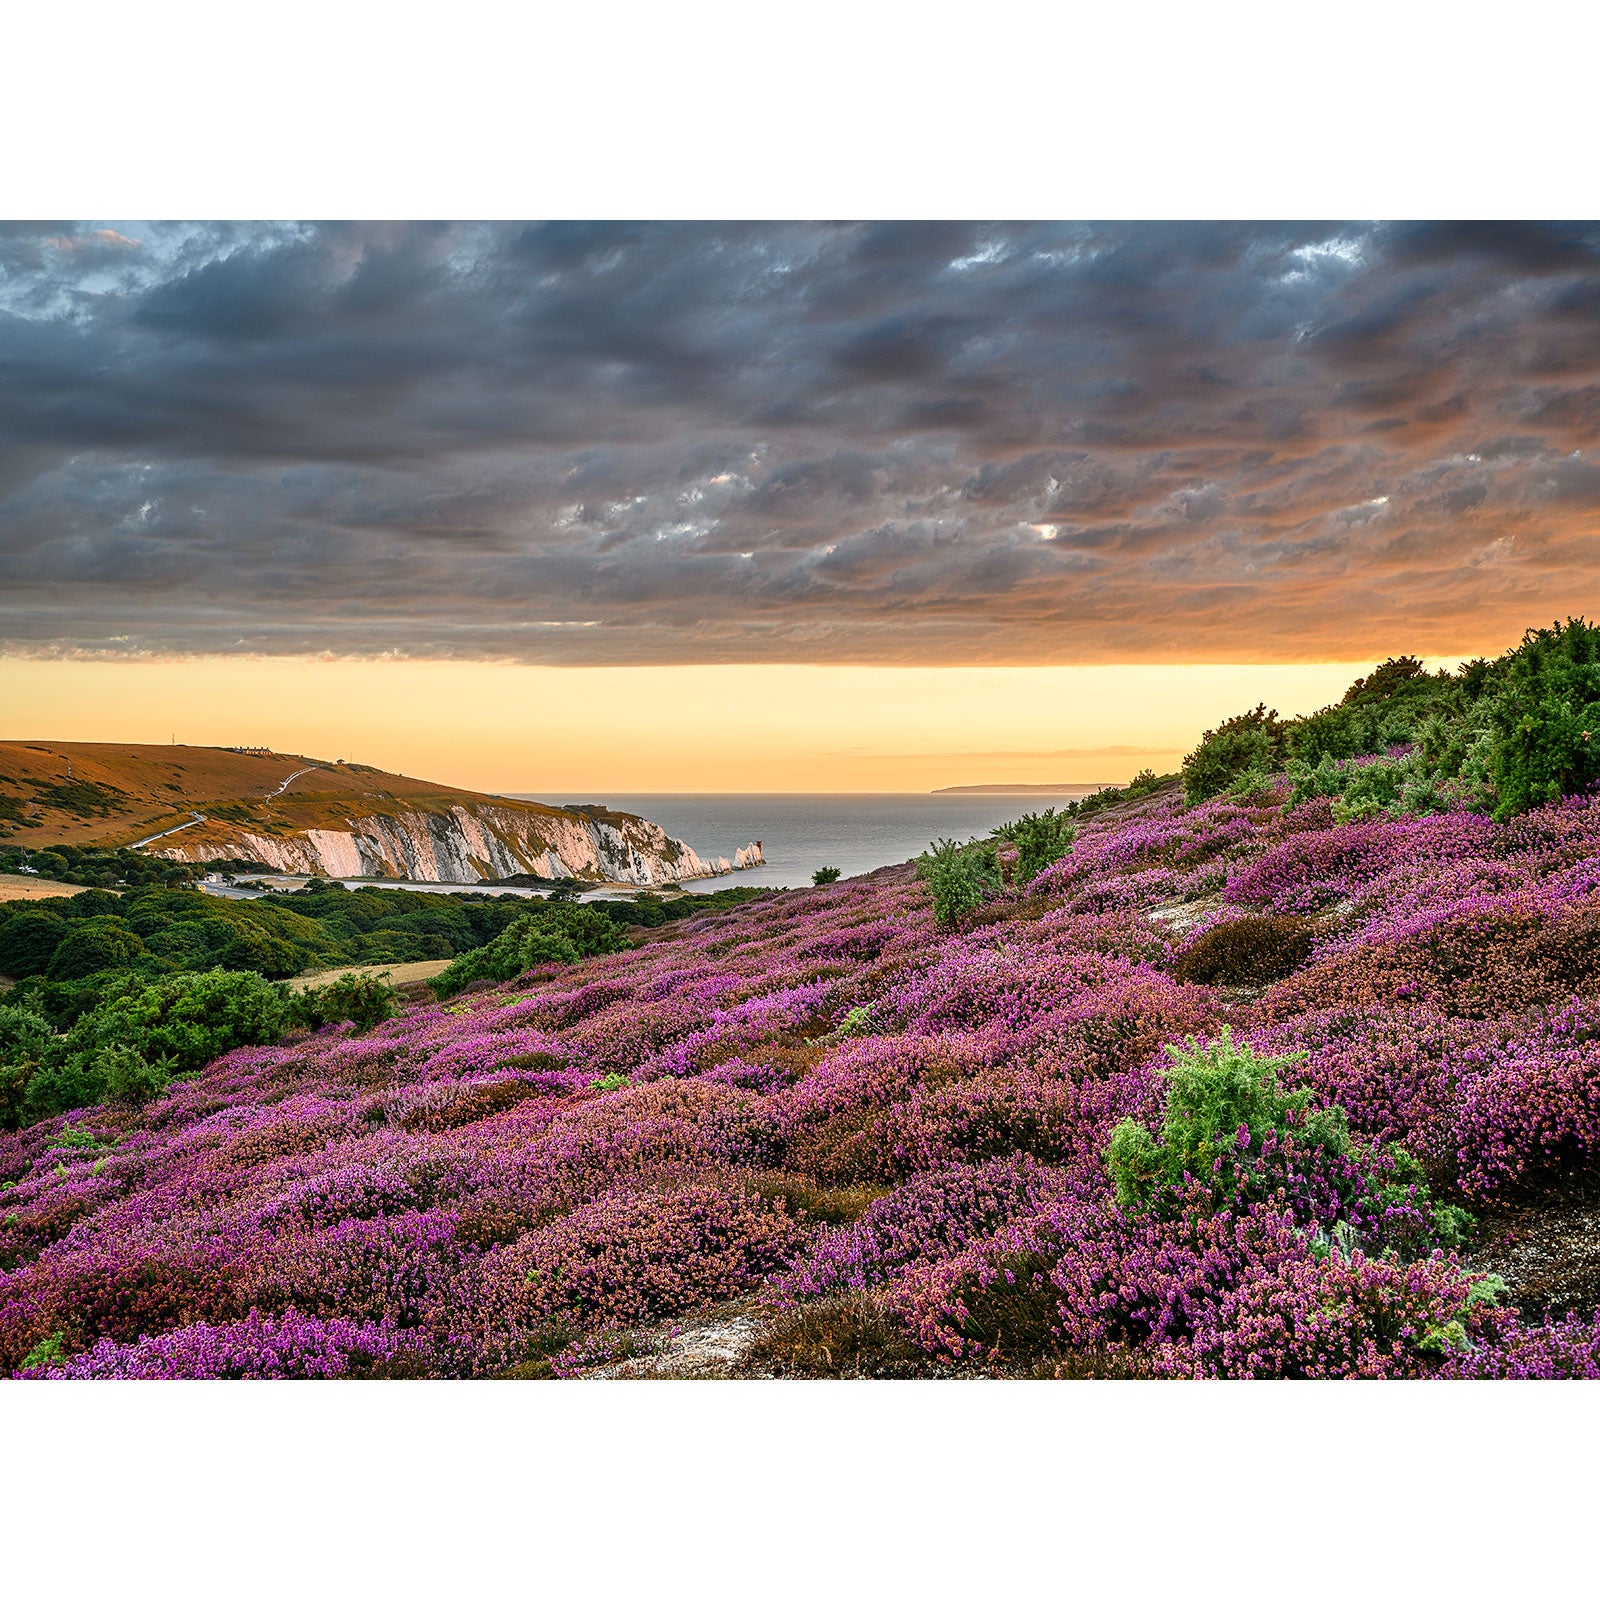 Vibrant Headon Warren in bloom with white cliffs of the Isle of Wight in the distance under a dramatic sunset sky by Available Light Photography.